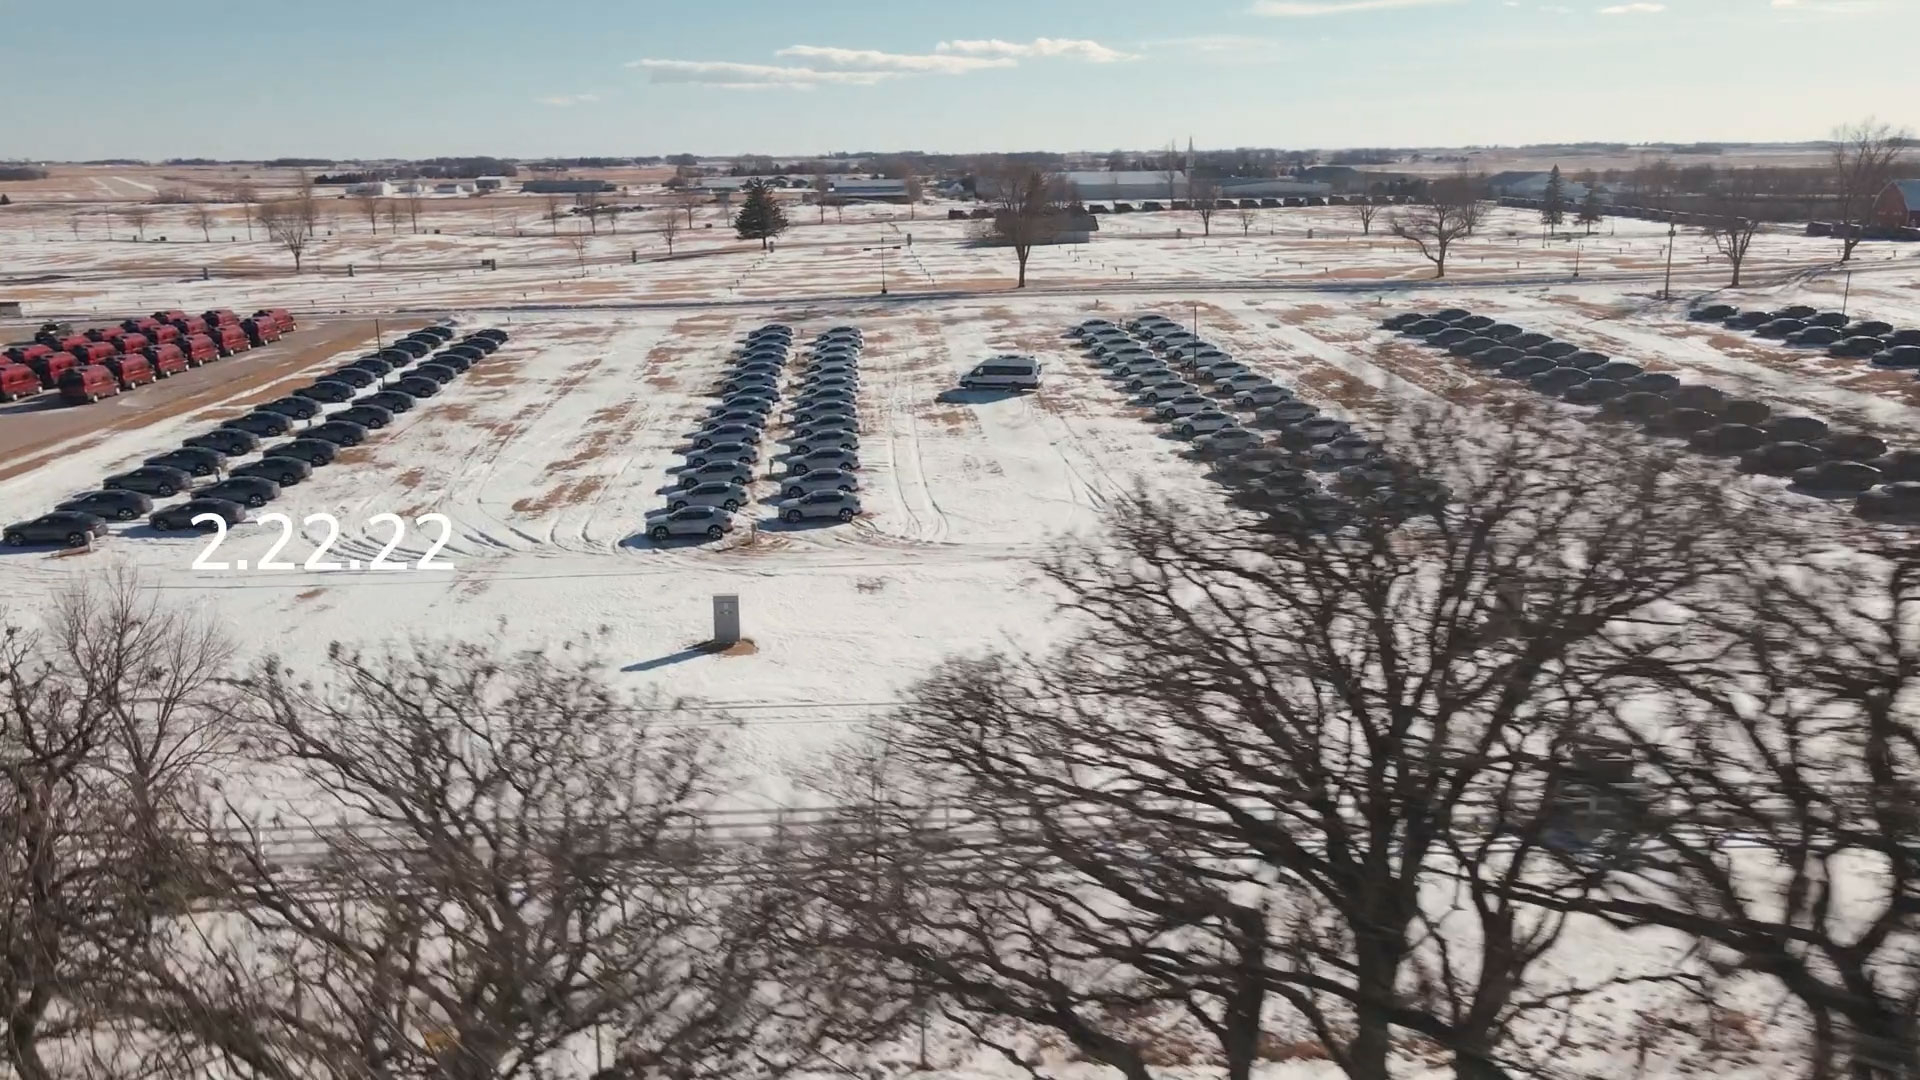 Pritchard EV celebrates 2.22.22 by bringing hundreds of electric vehicles to Clear Lake, IA.